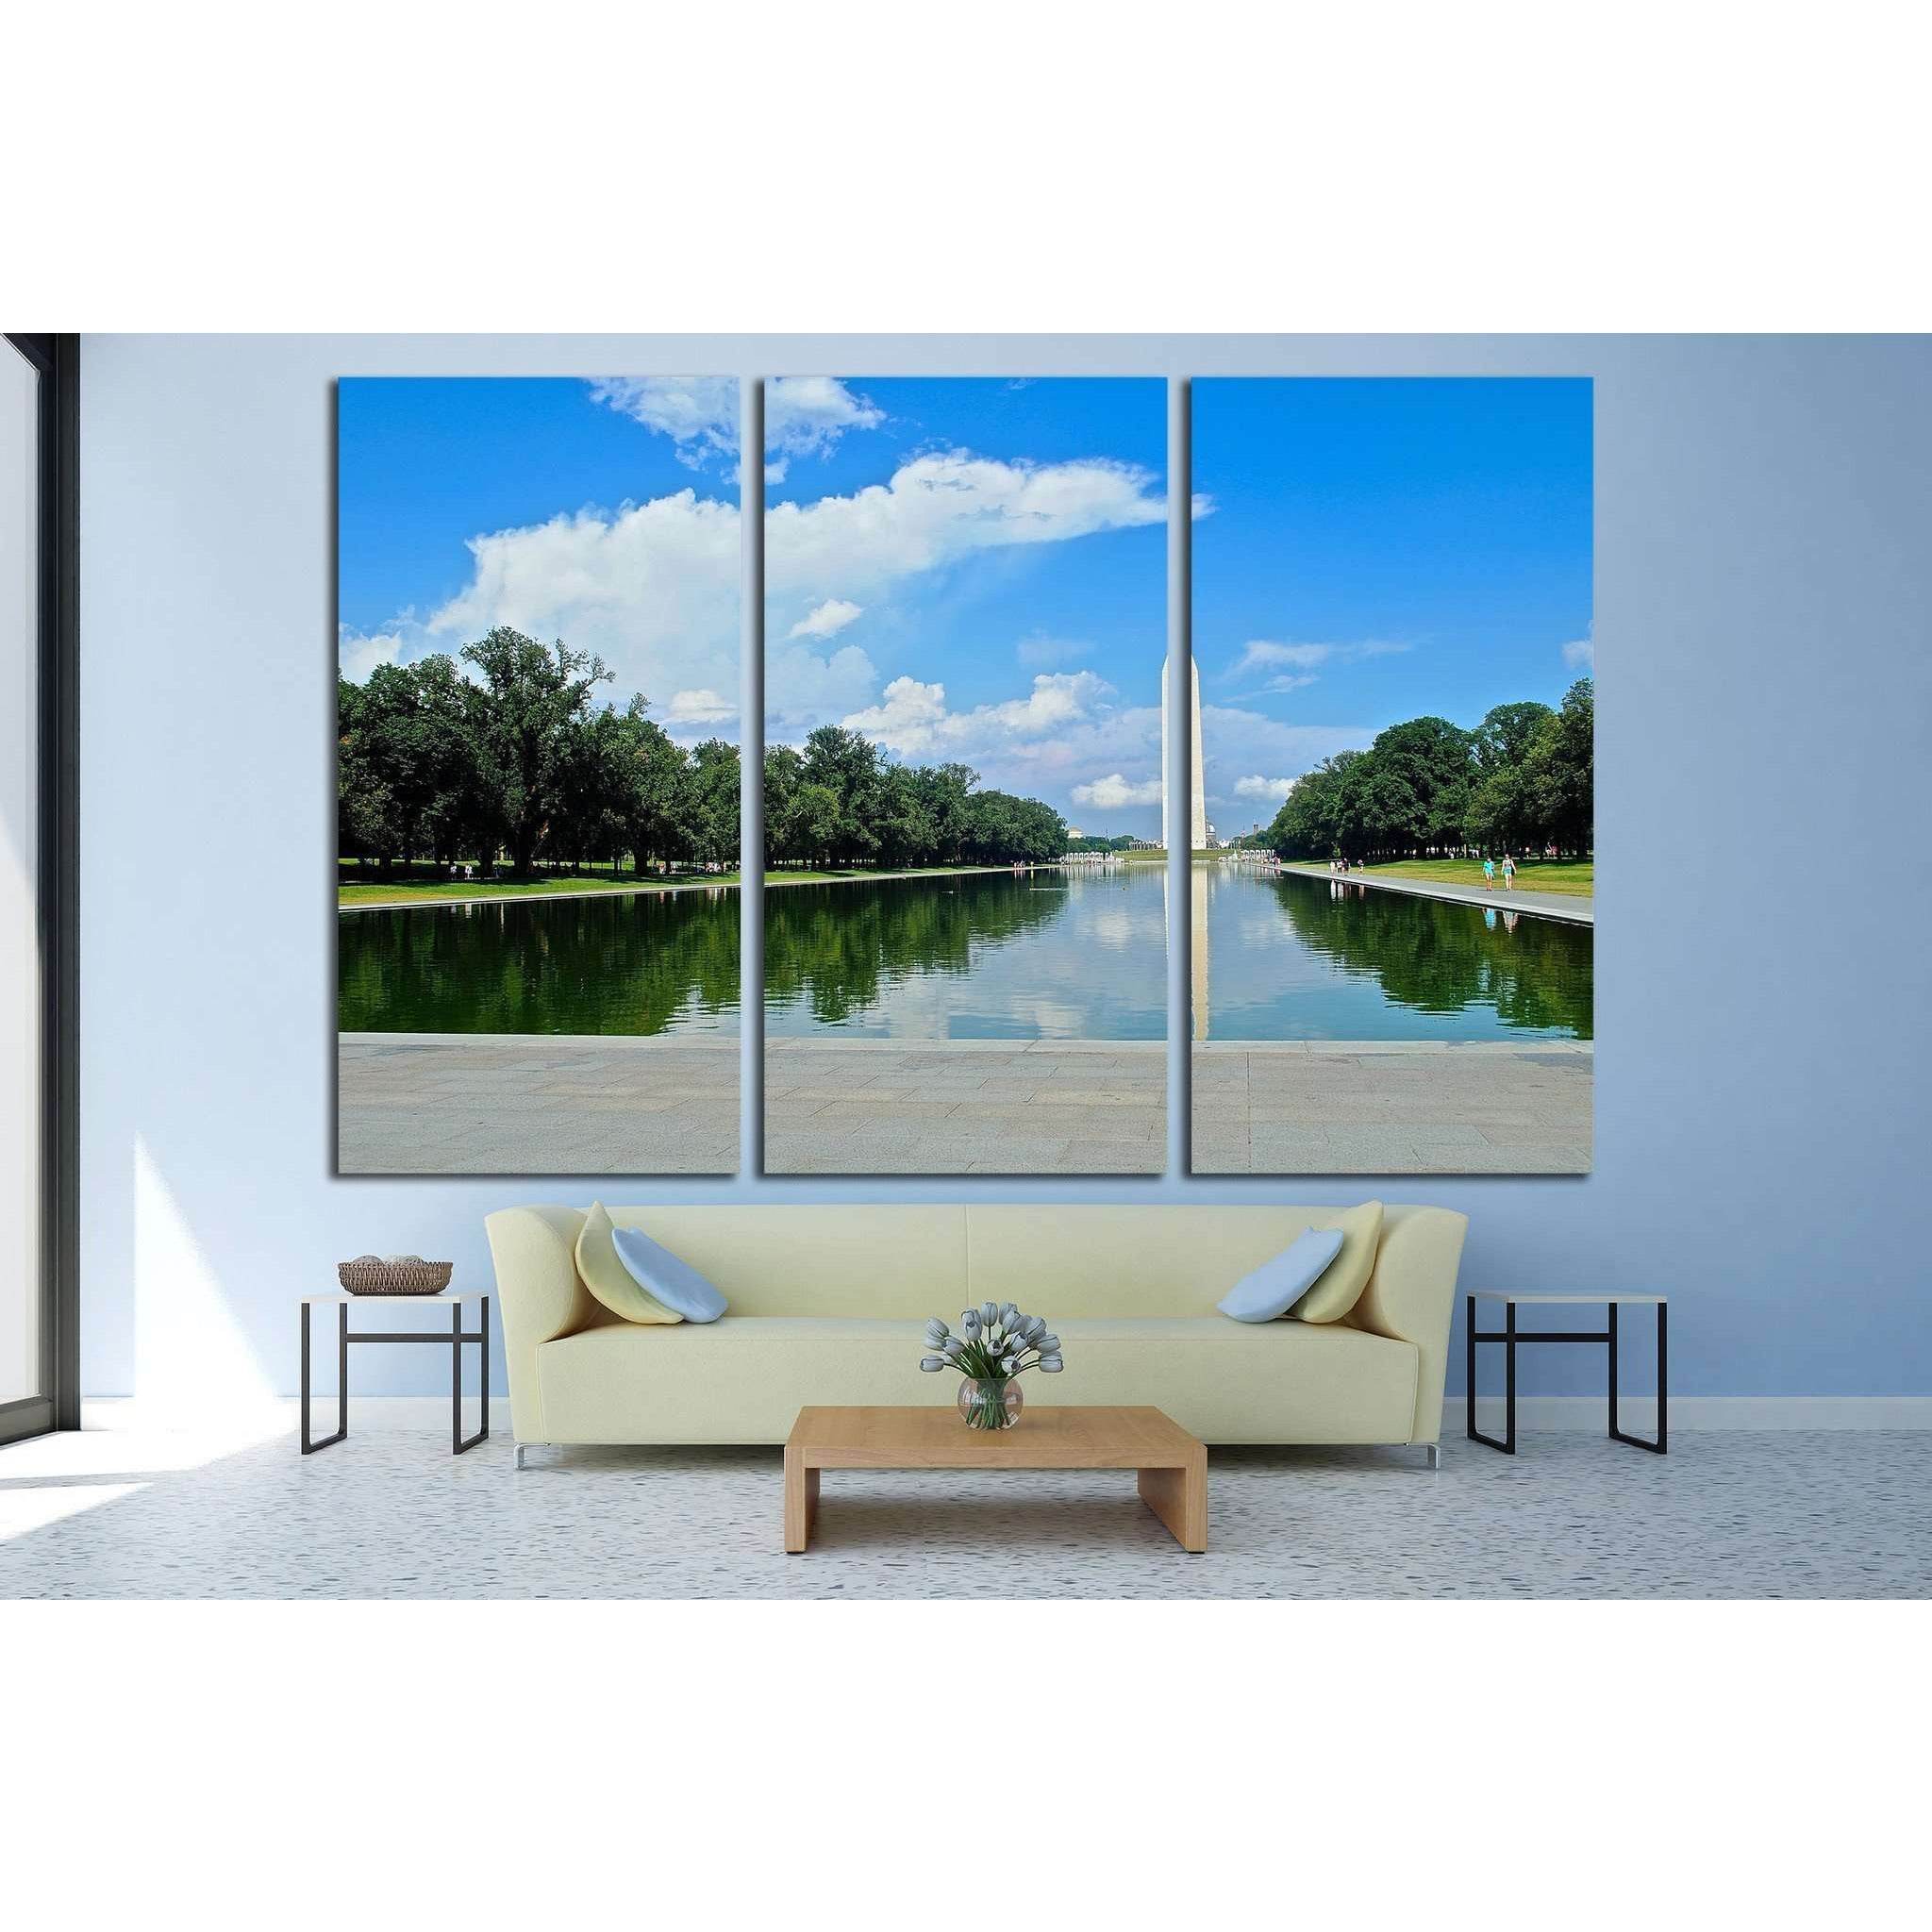 Washington memorial from the pool №2067 Ready to Hang Canvas Print